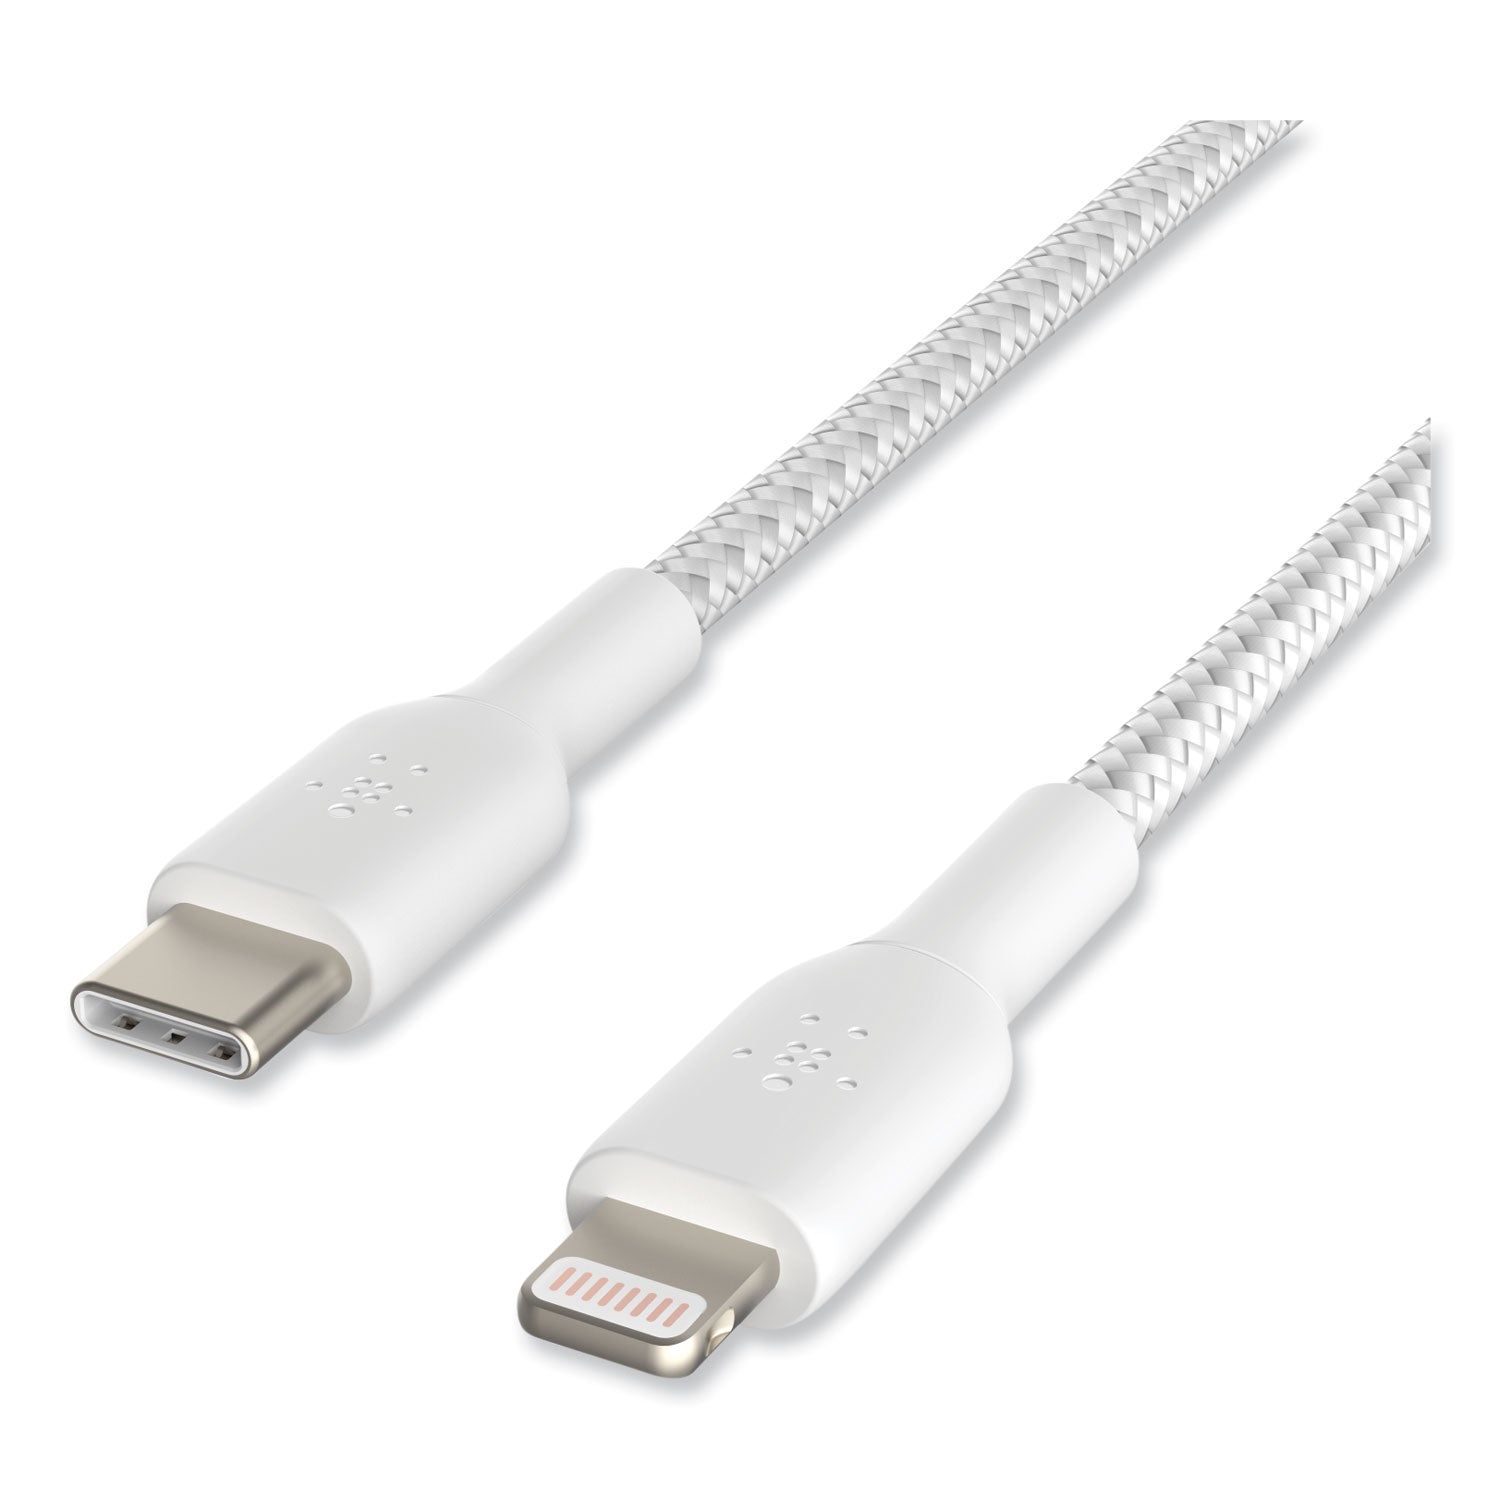 boost-charge-braided-apple-lightning-to-usb-c-chargesync-cable-33-ft-white_blkcaa004bt1mwh - 2